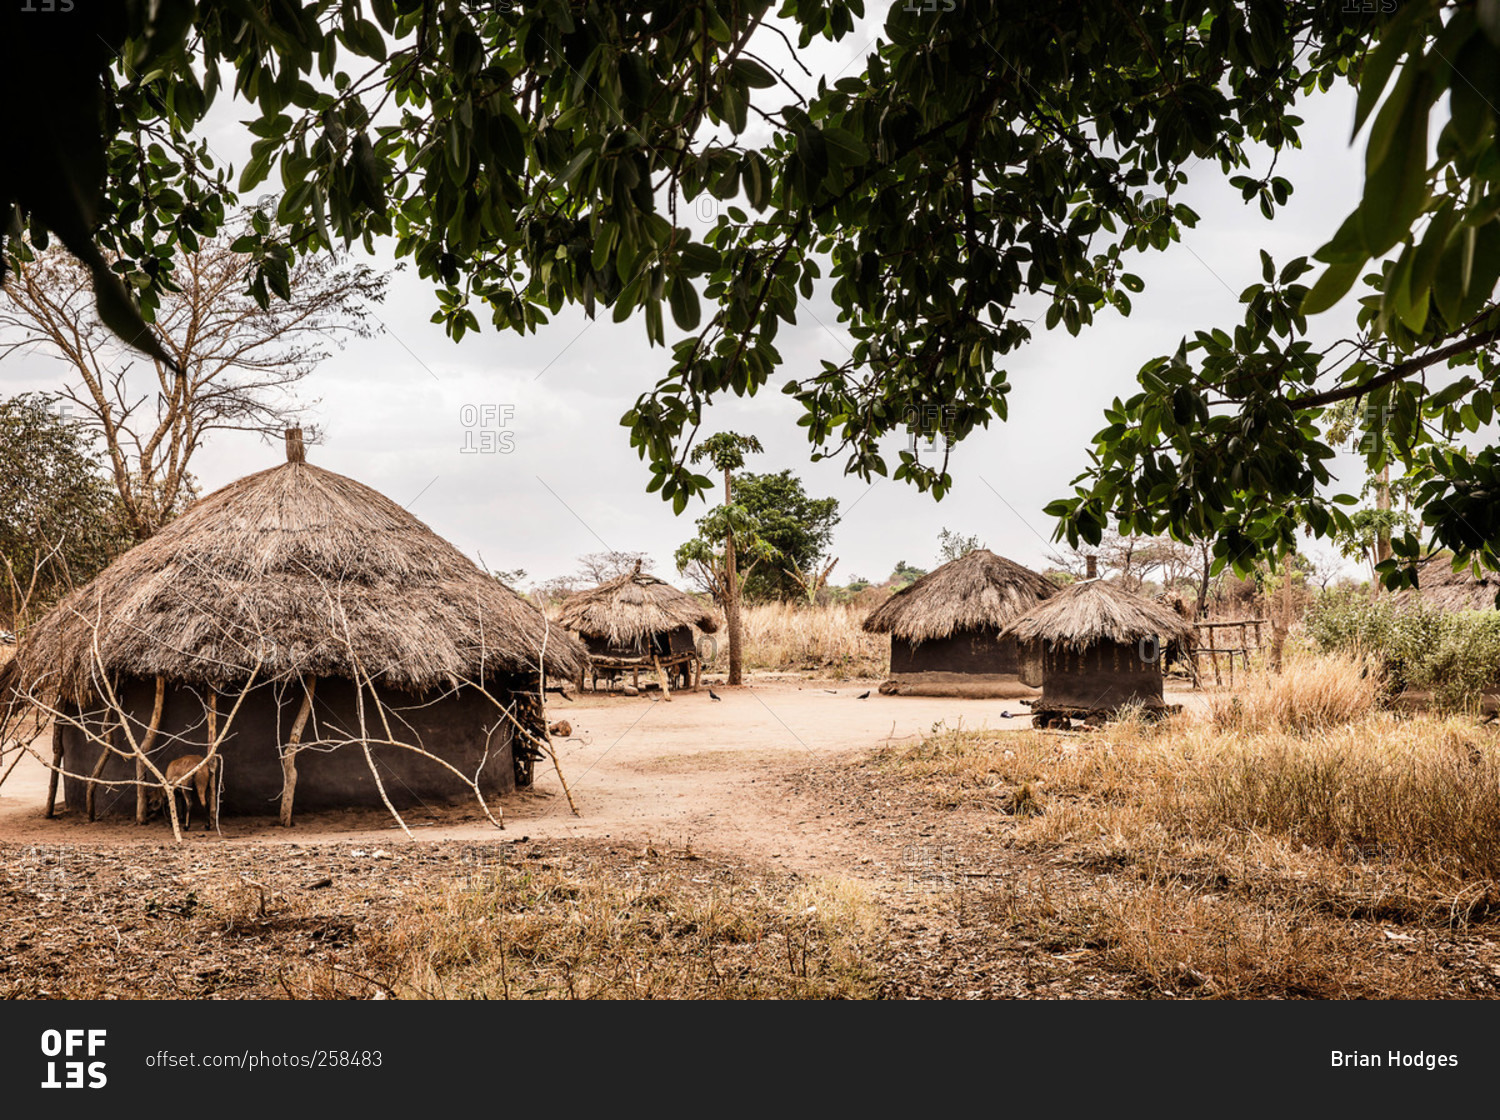 Thatched roof huts in a Ugandan village